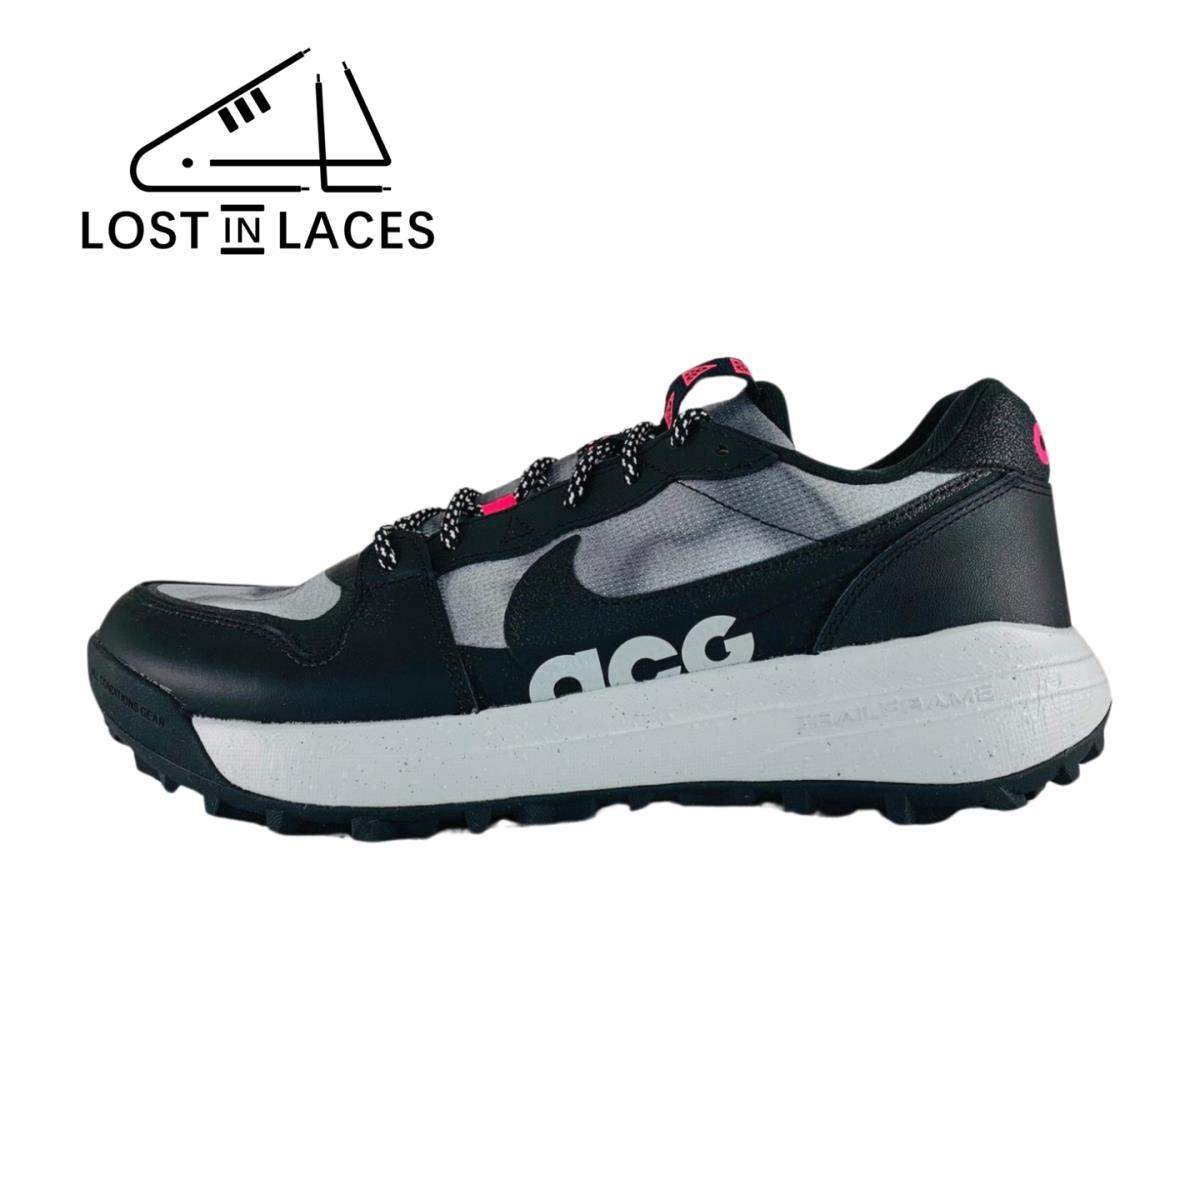 Nike Acg Lowcate Grey Pink Hiking Shoes Trail Running Shoes Men`s Sizes